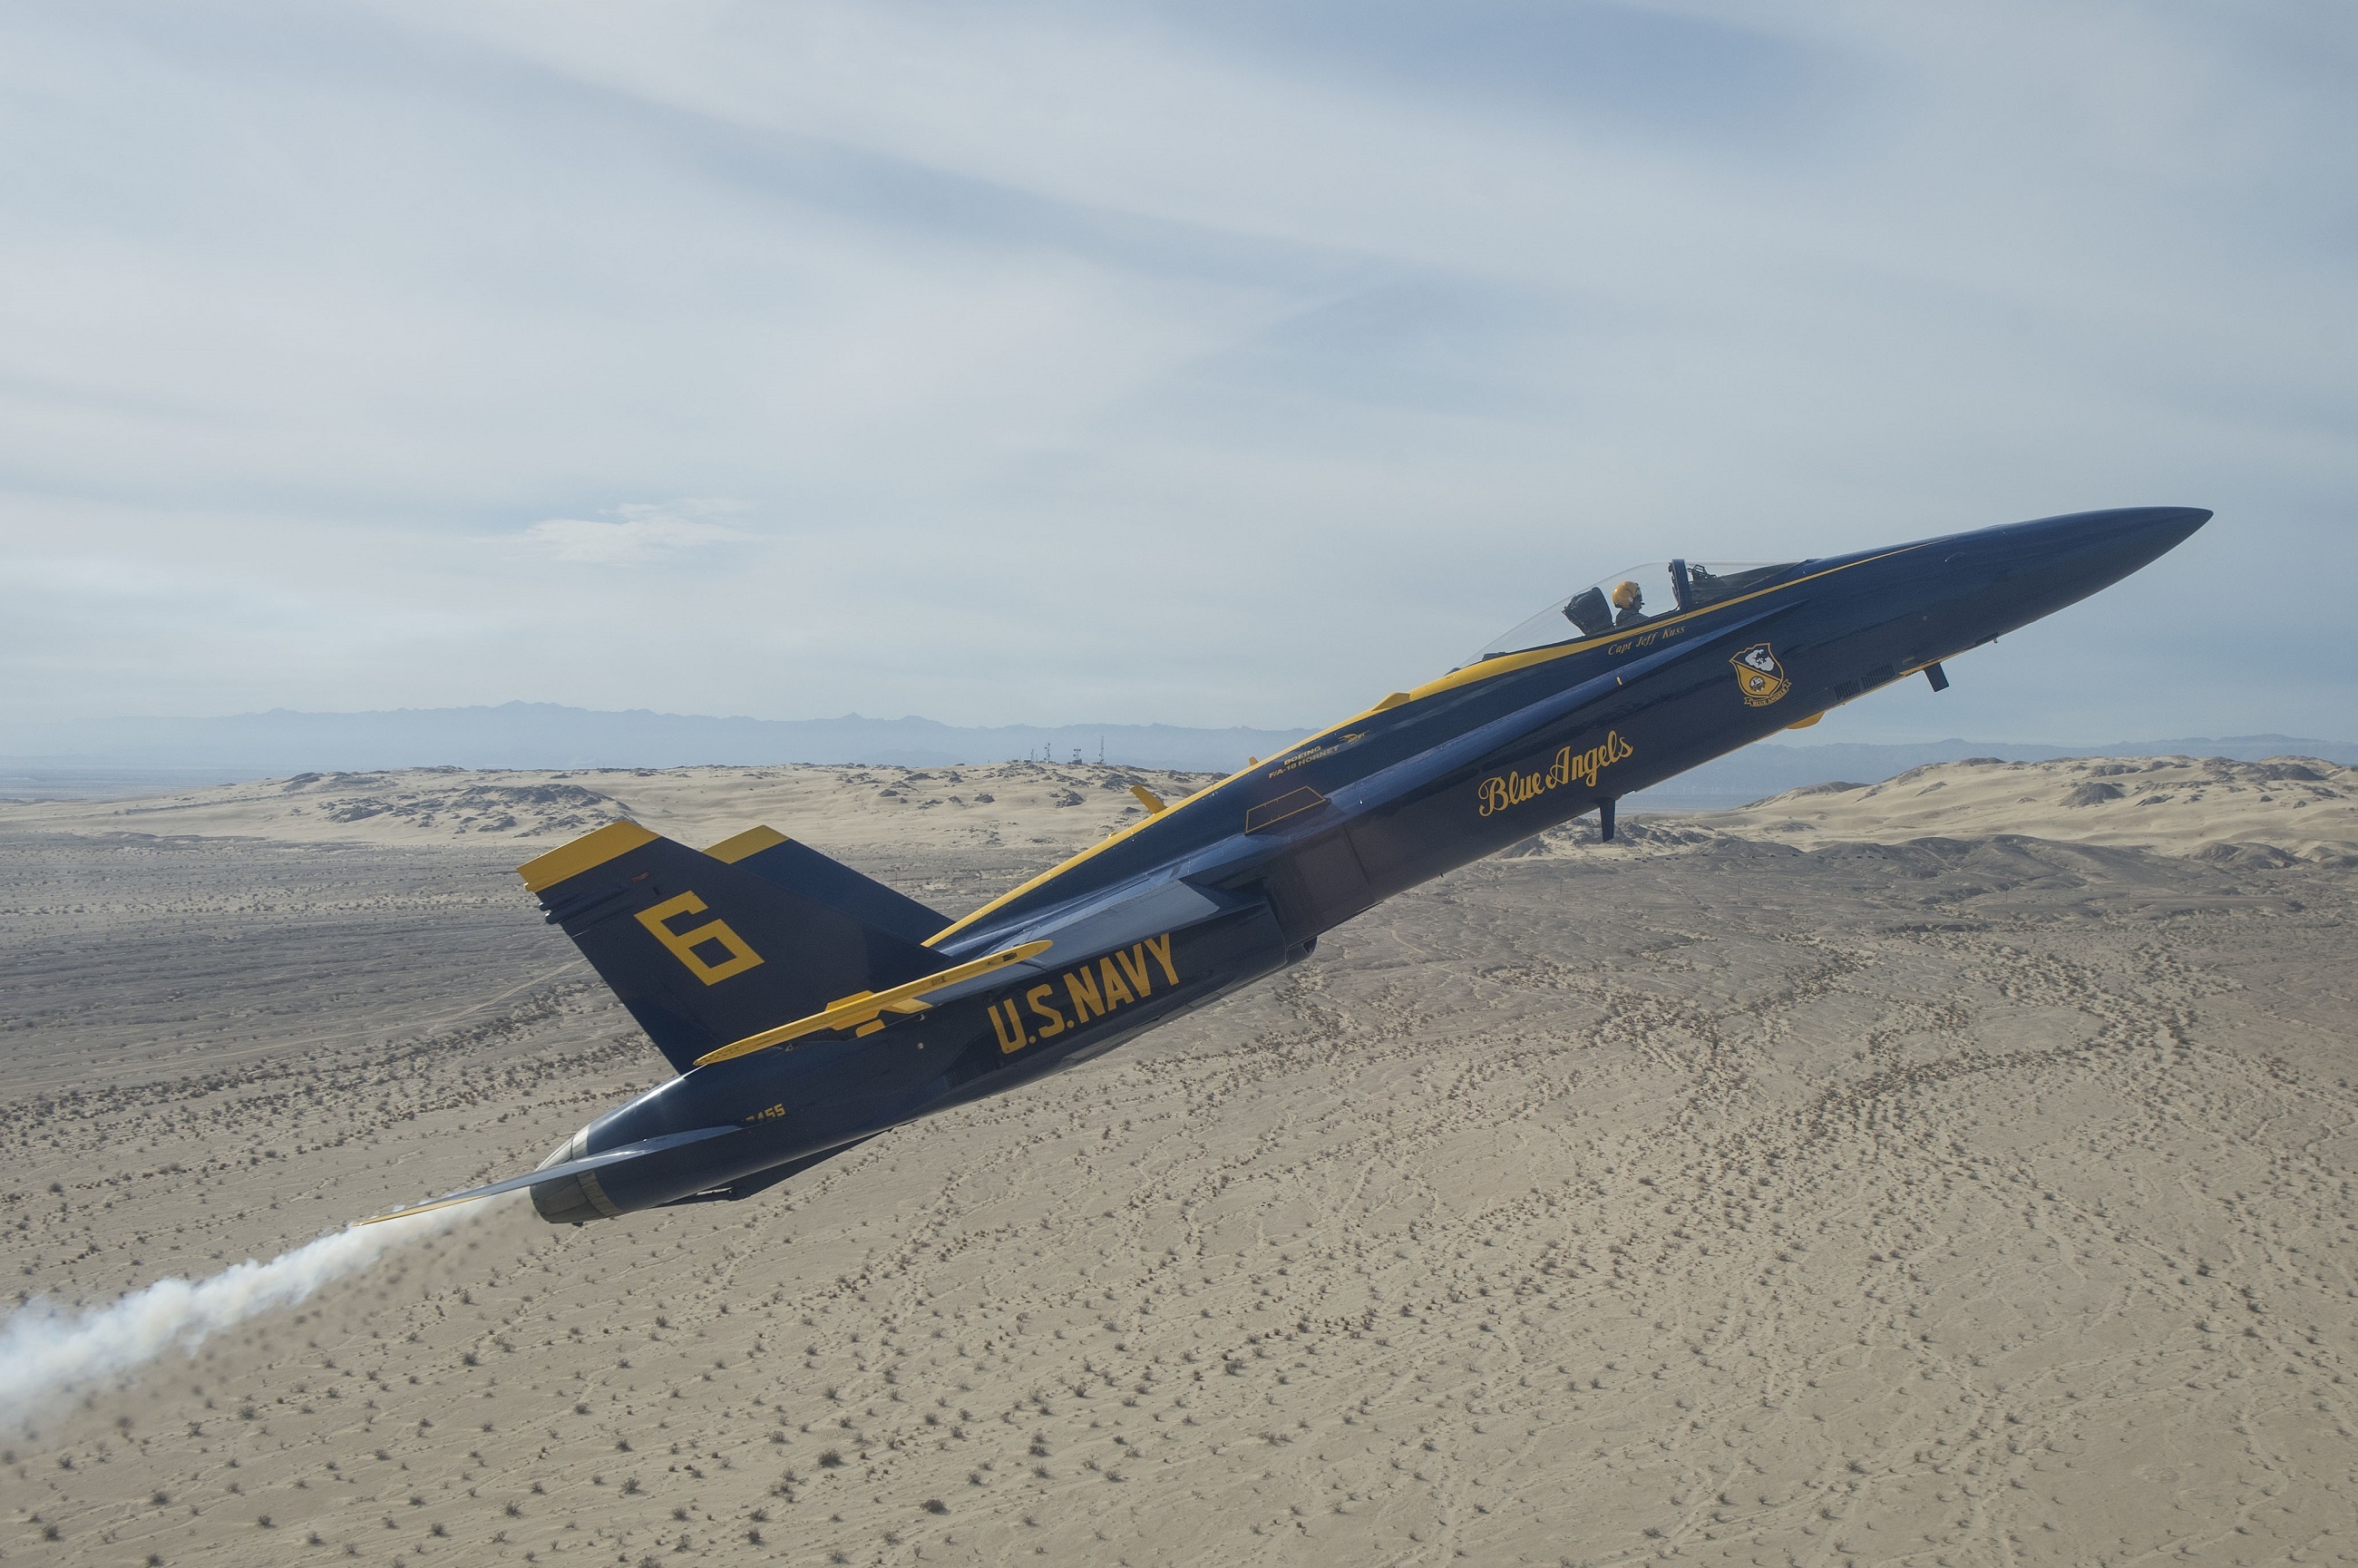 Blue Angles in a demonstration maneuver by skeeze